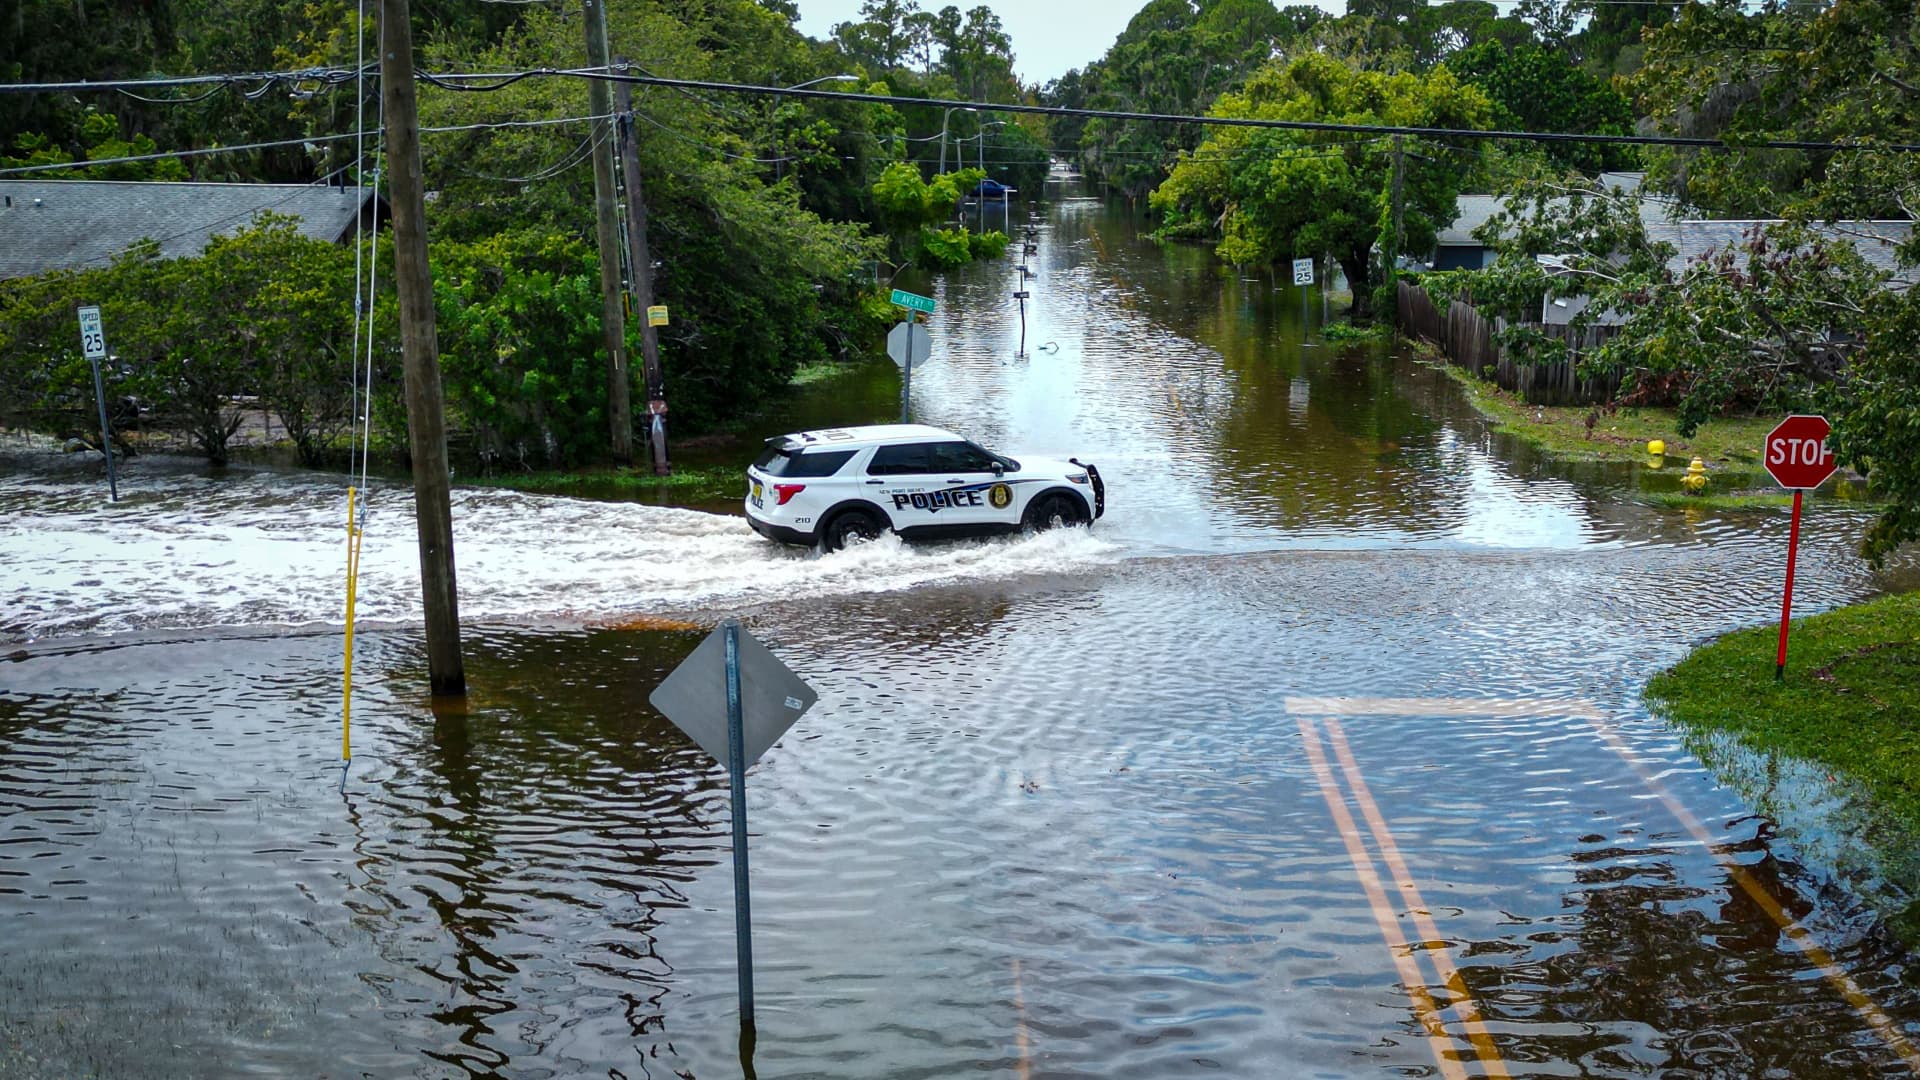 An aerial view shows a police vehicle driving along a flooded street in New Port Richey, Florida, on August 30, 2023, after Hurricane Idalia made landfall.